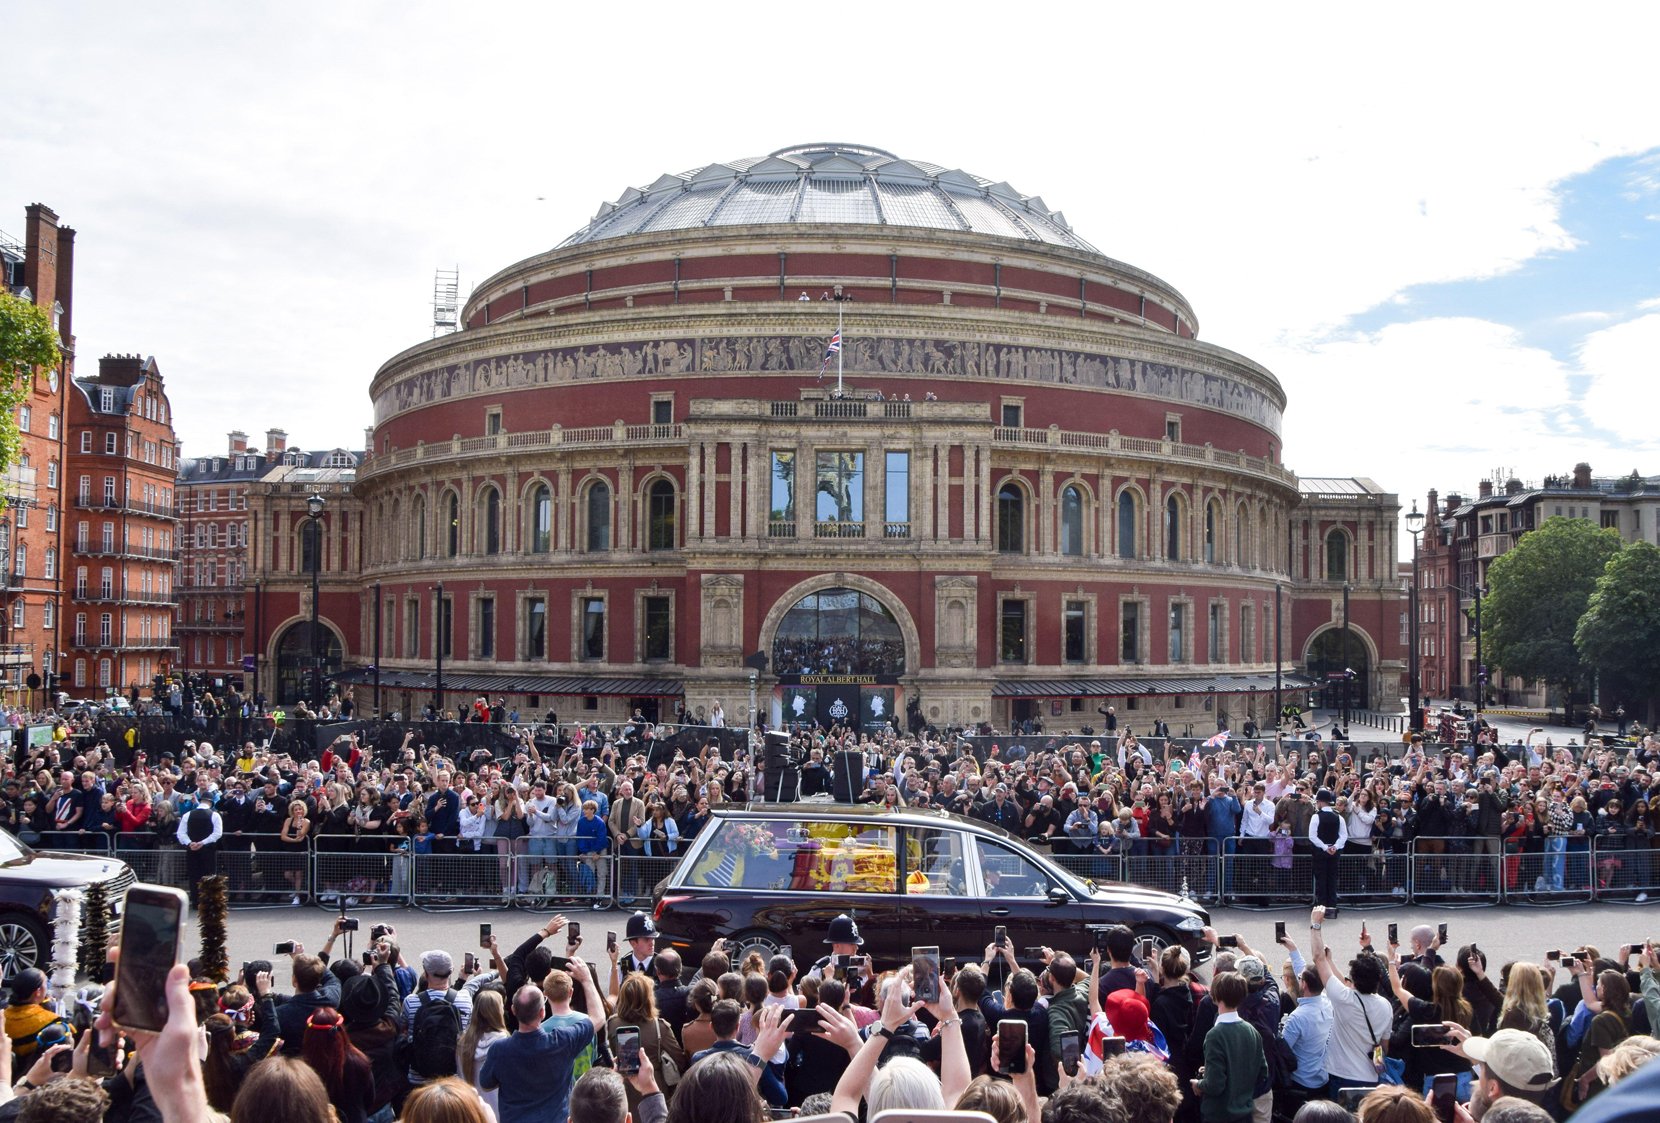 The hearse passes crowds gathered outside the Royal Albert Hall